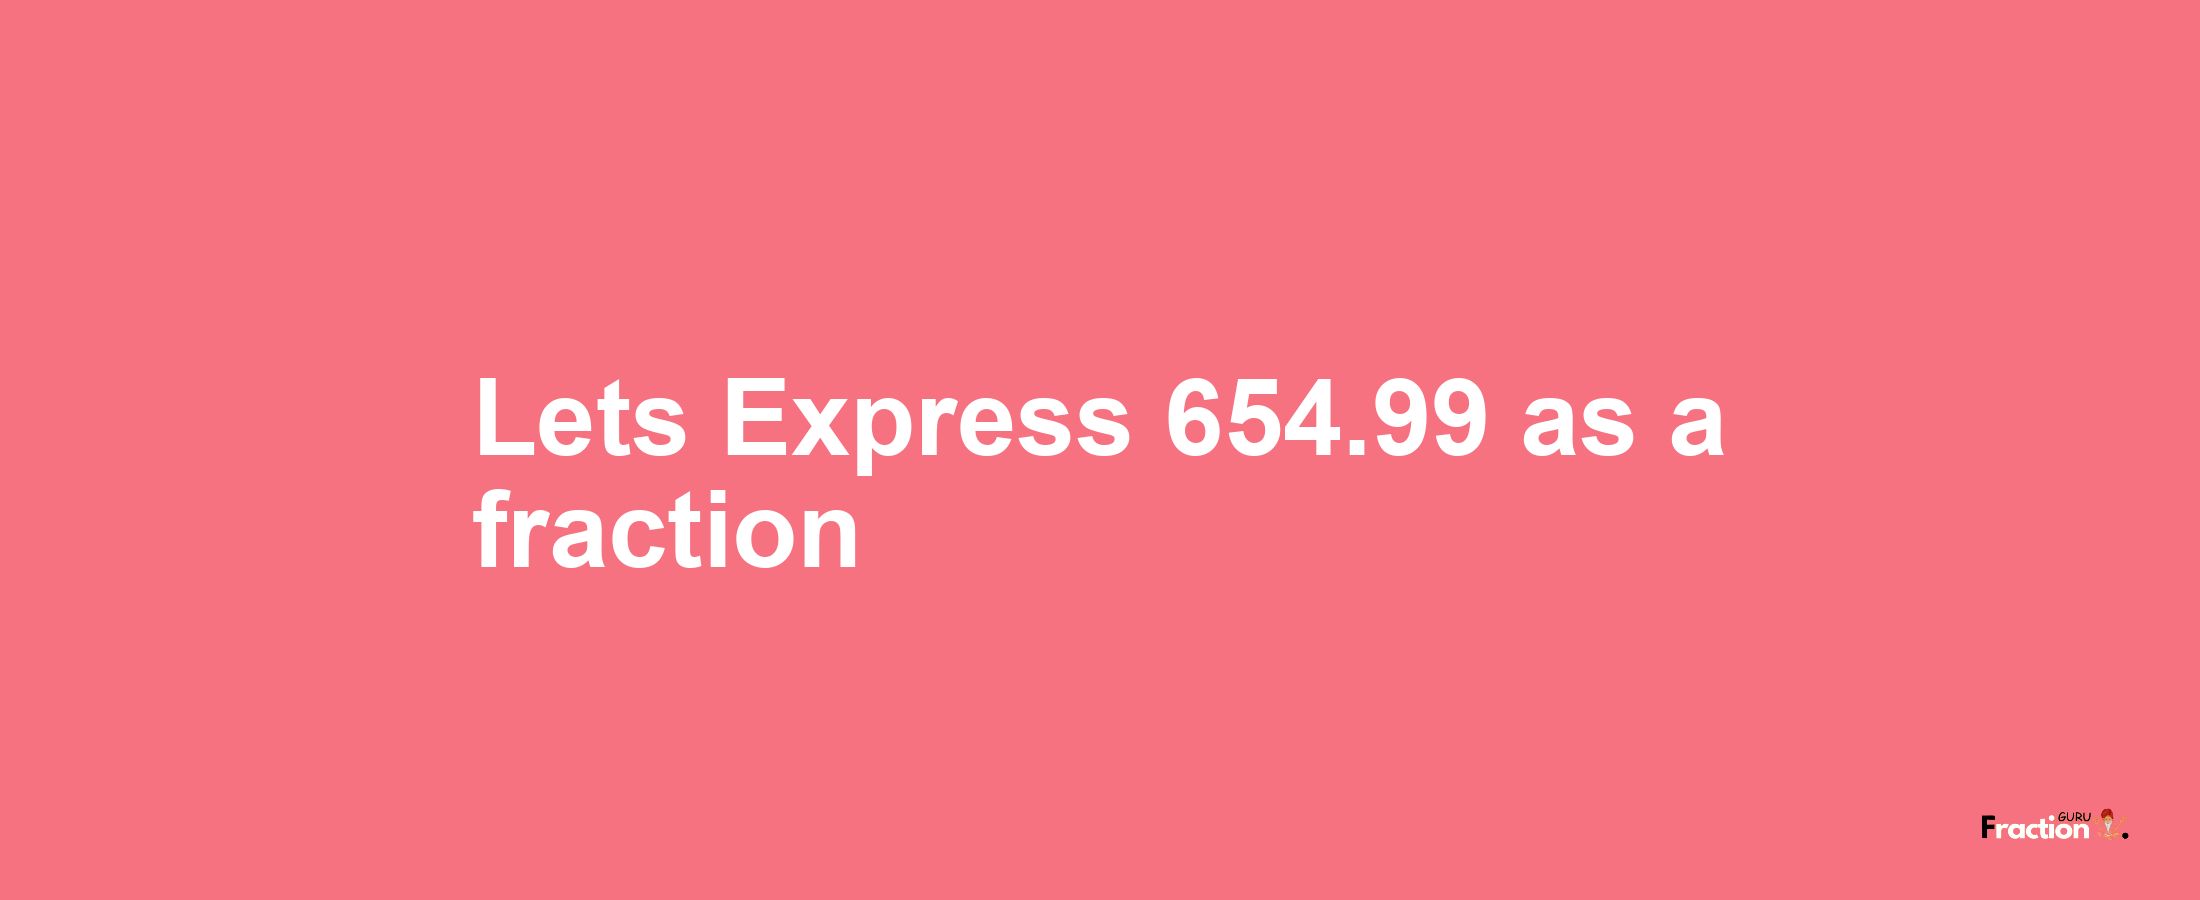 Lets Express 654.99 as afraction